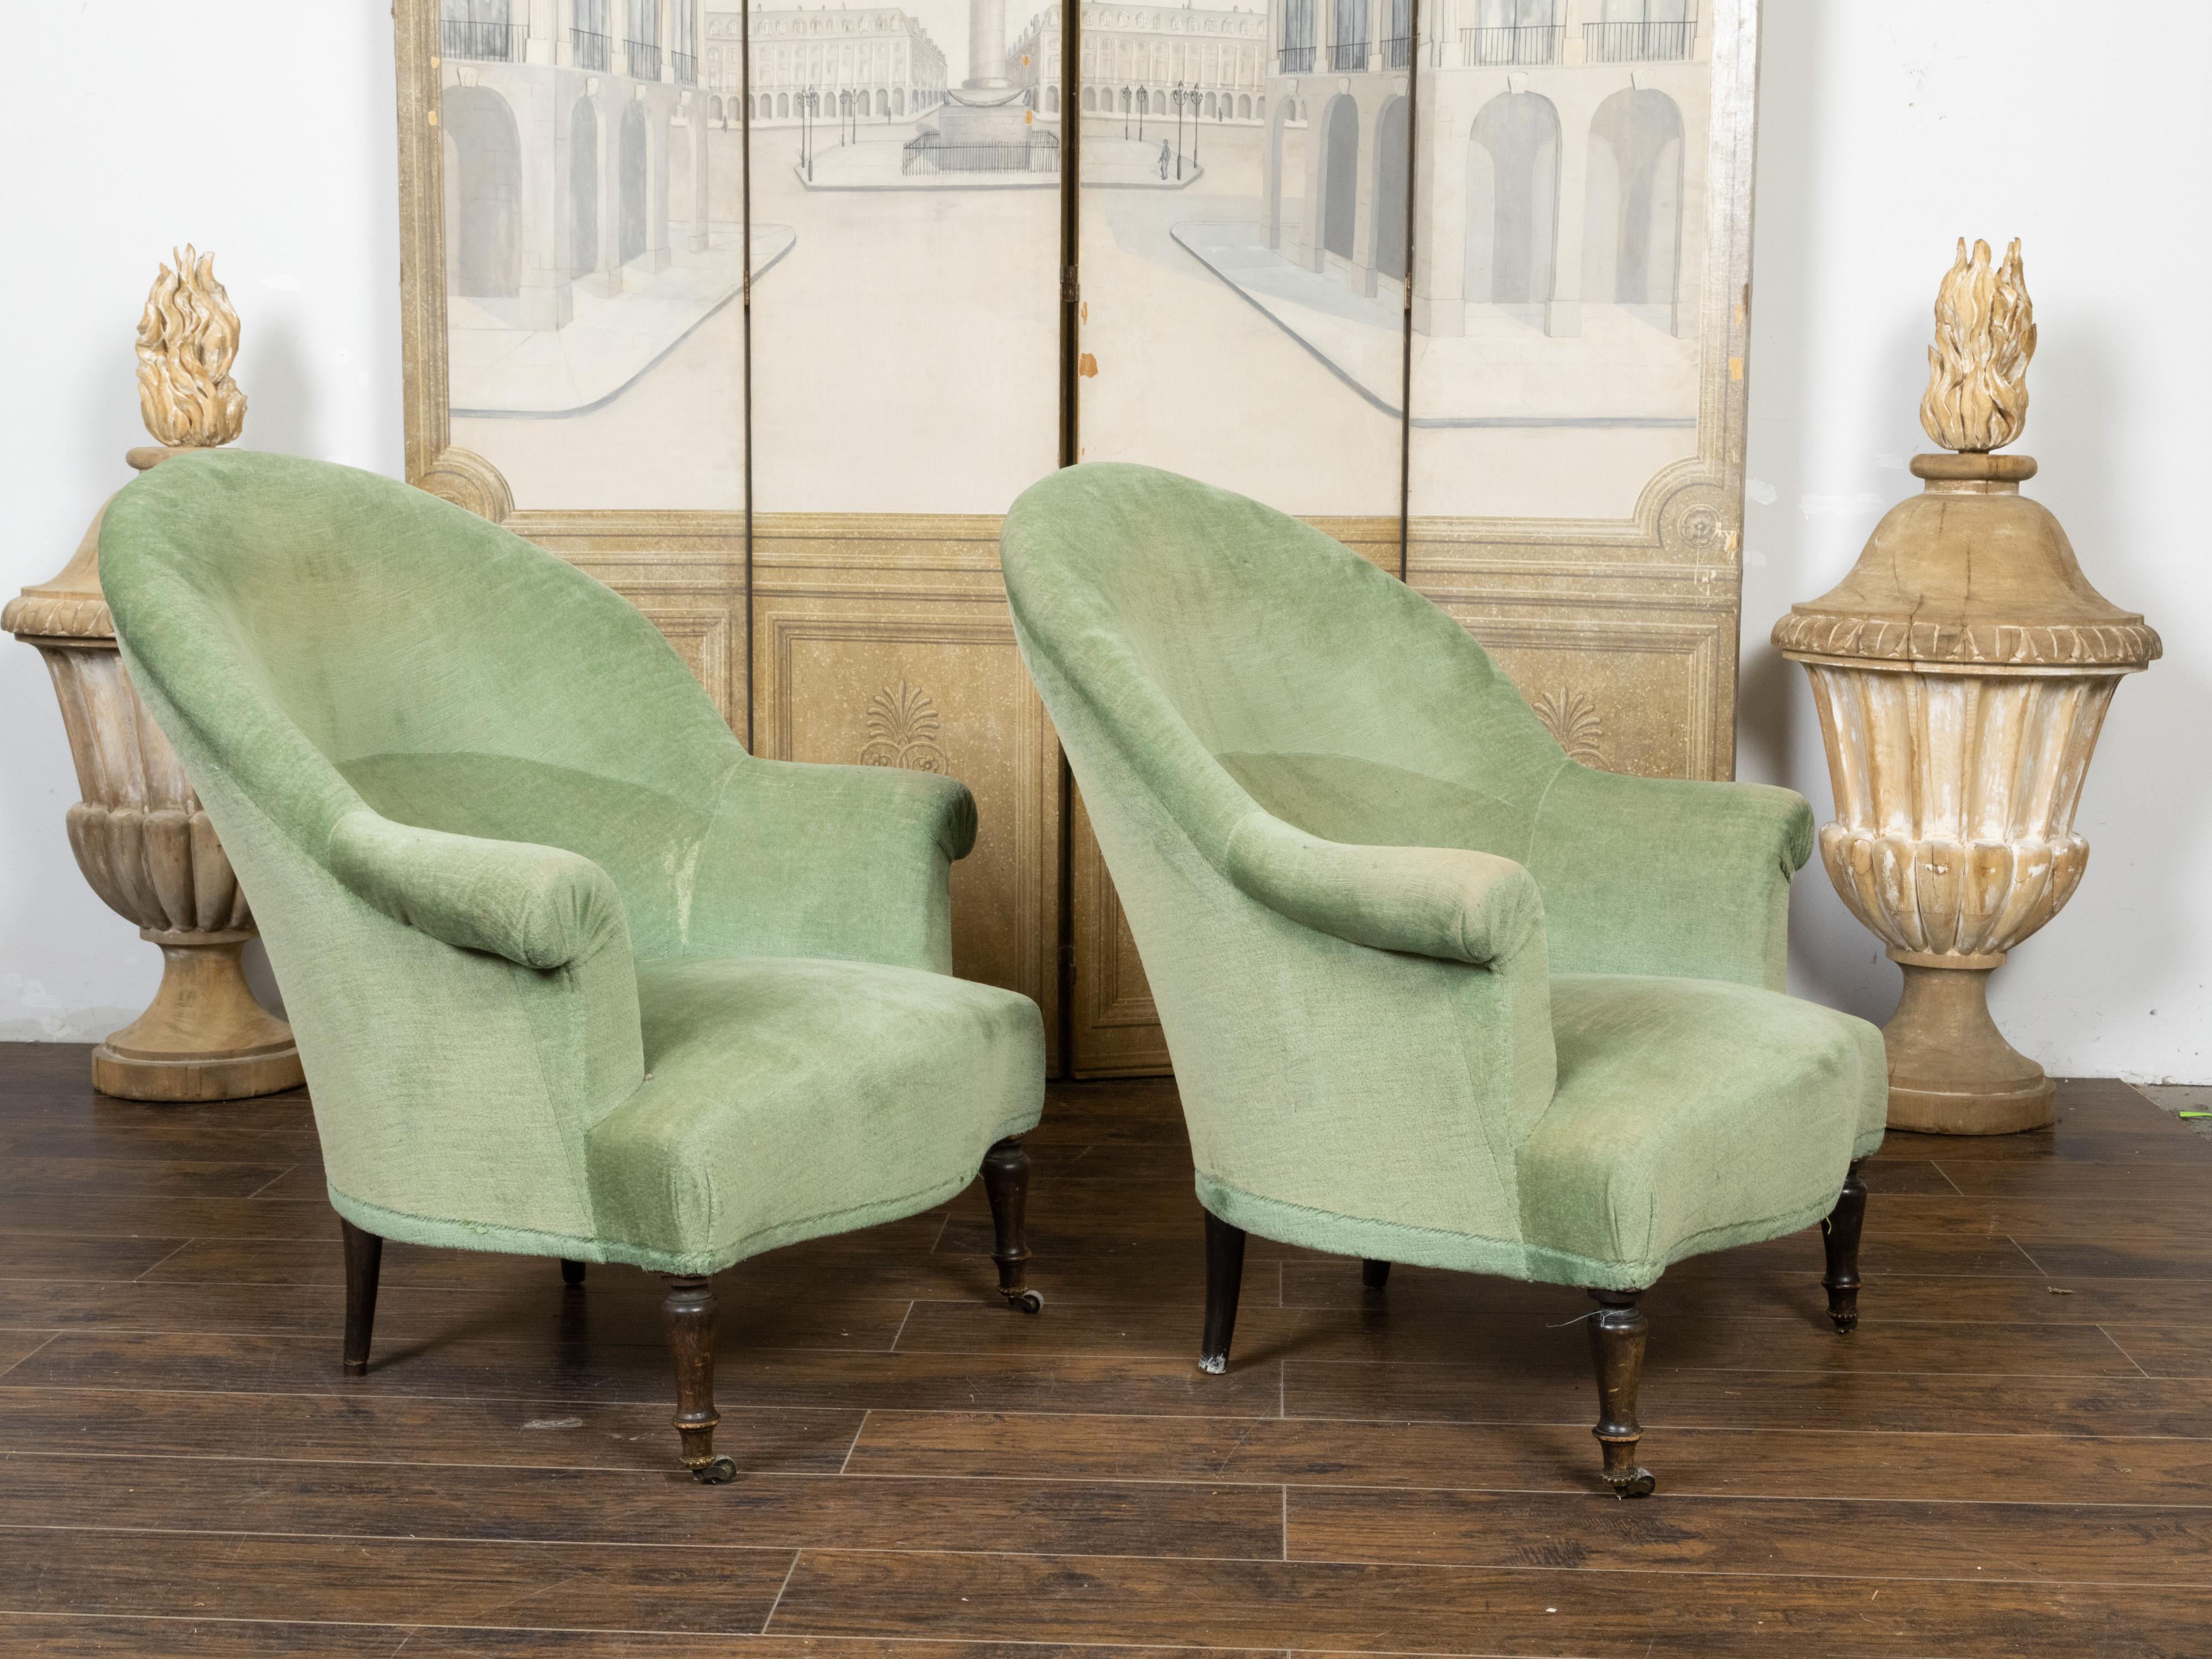 Pair of French Turn of the Century Bergère Chairs with Green Velvet Upholstery For Sale 3